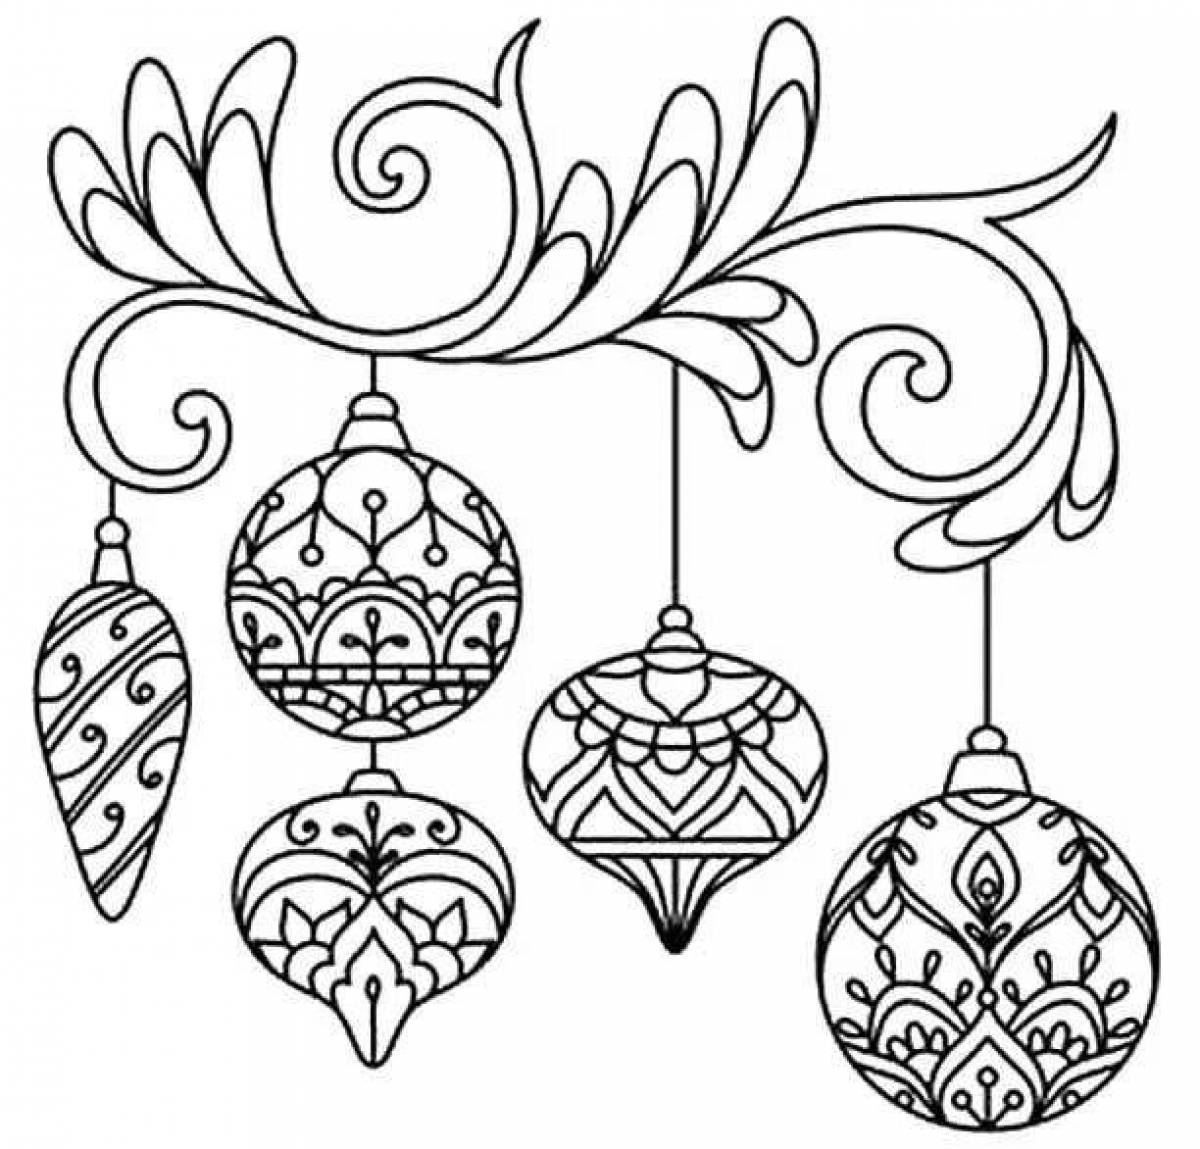 Grand coloring page christmas patterns